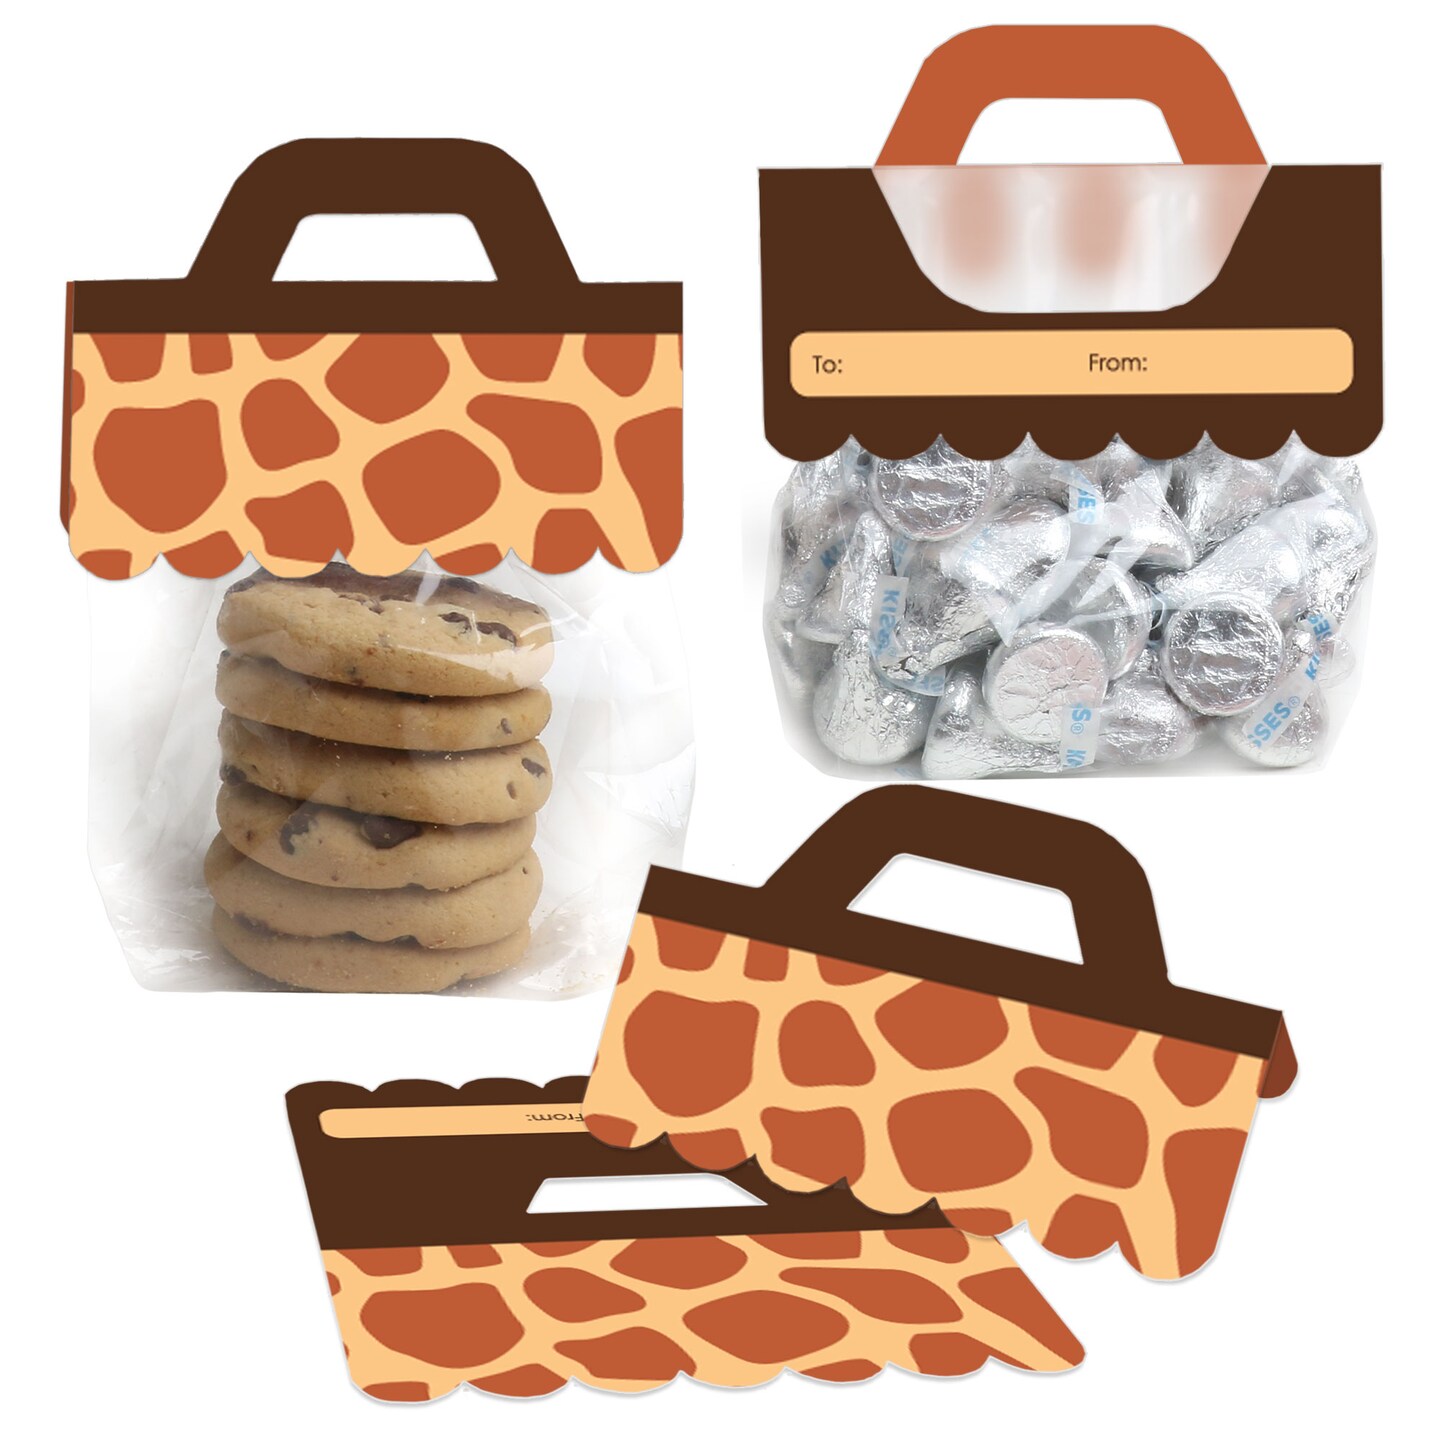 Big Dot of Happiness Giraffe Print - DIY Safari Party Clear Goodie Favor Bag Labels - Candy Bags with Toppers - Set of 24